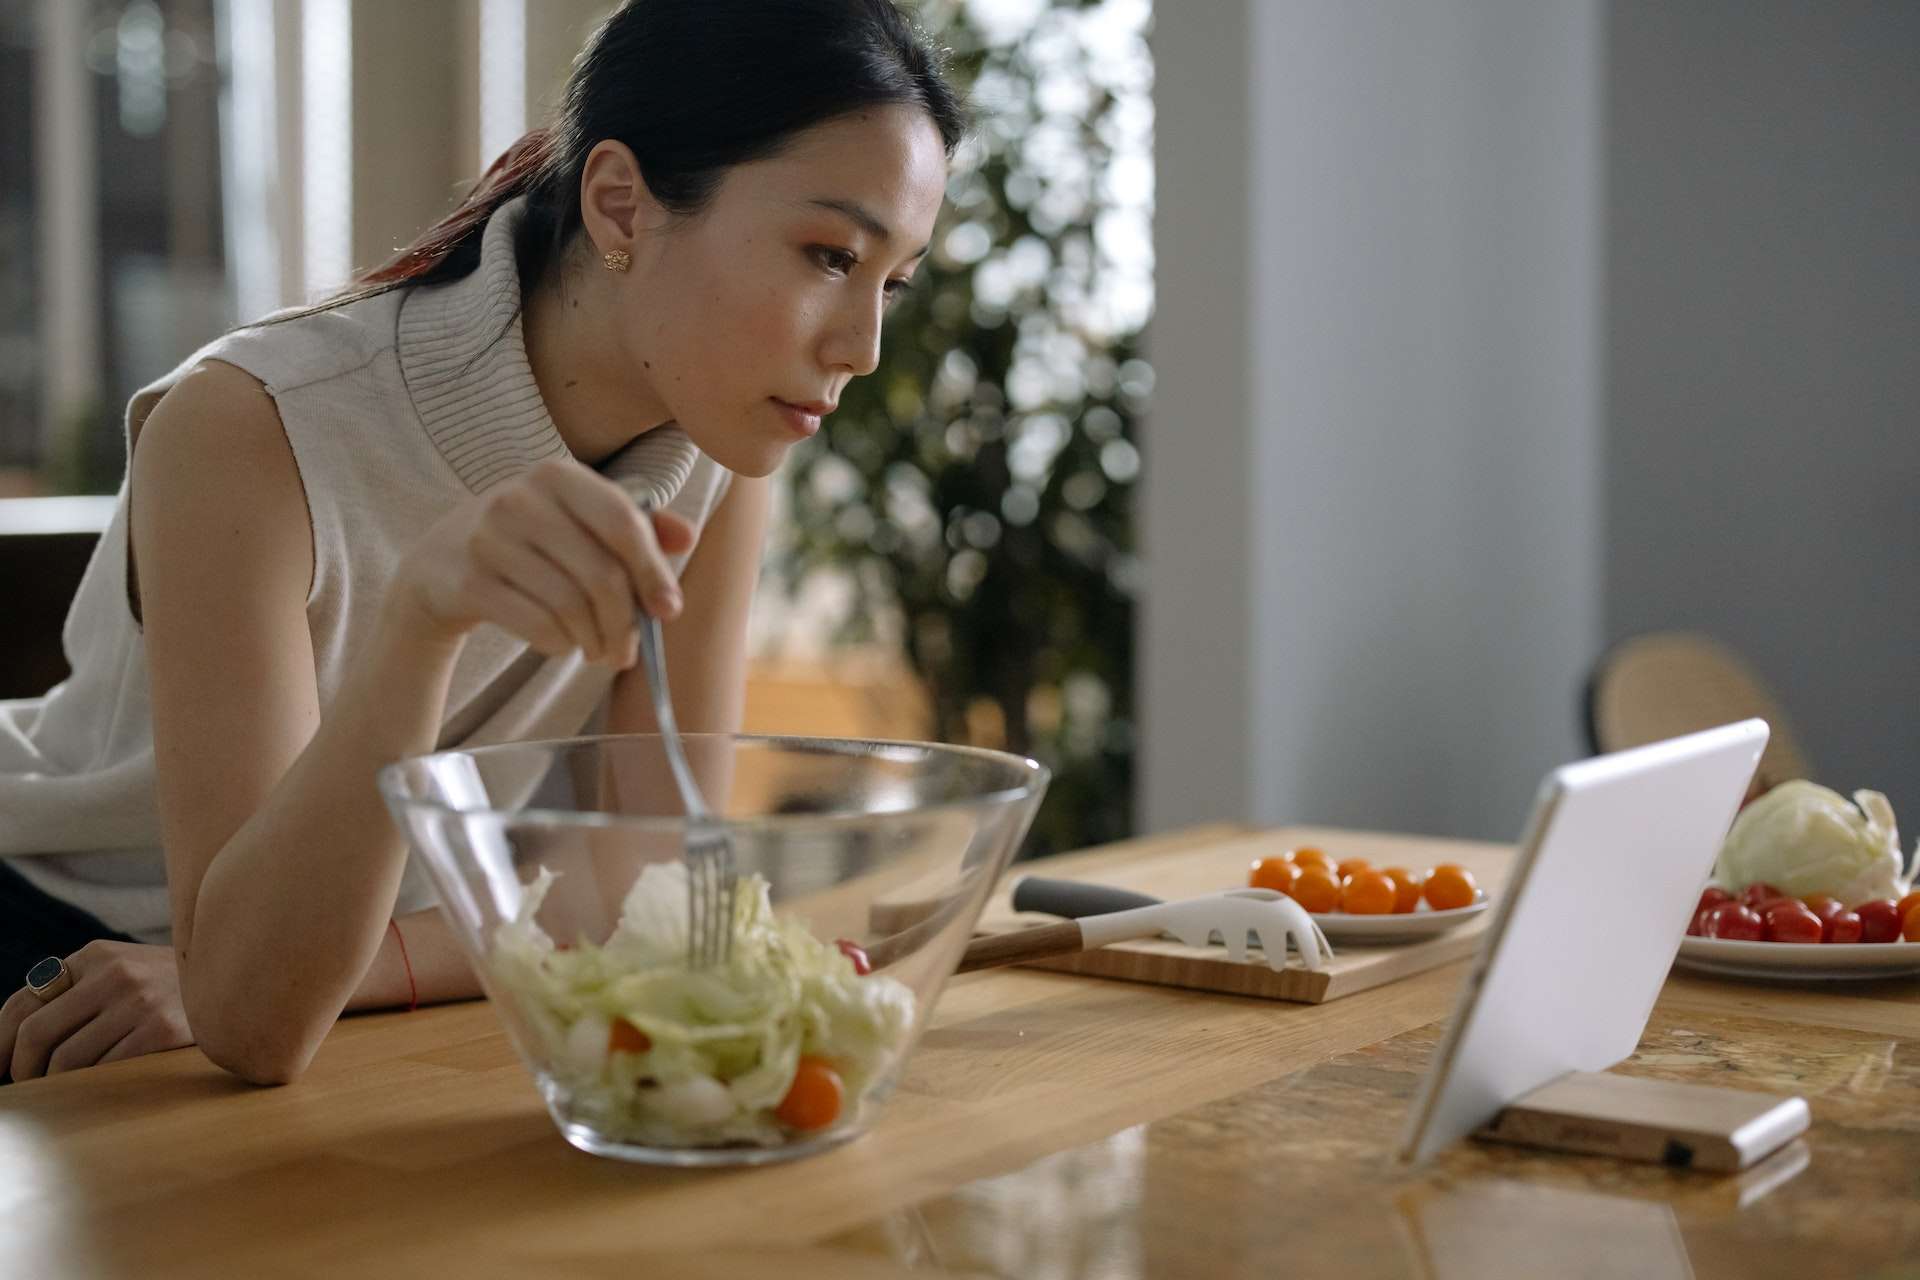 A Woman Looking at the Digital Tablet while eating his vegetable salad